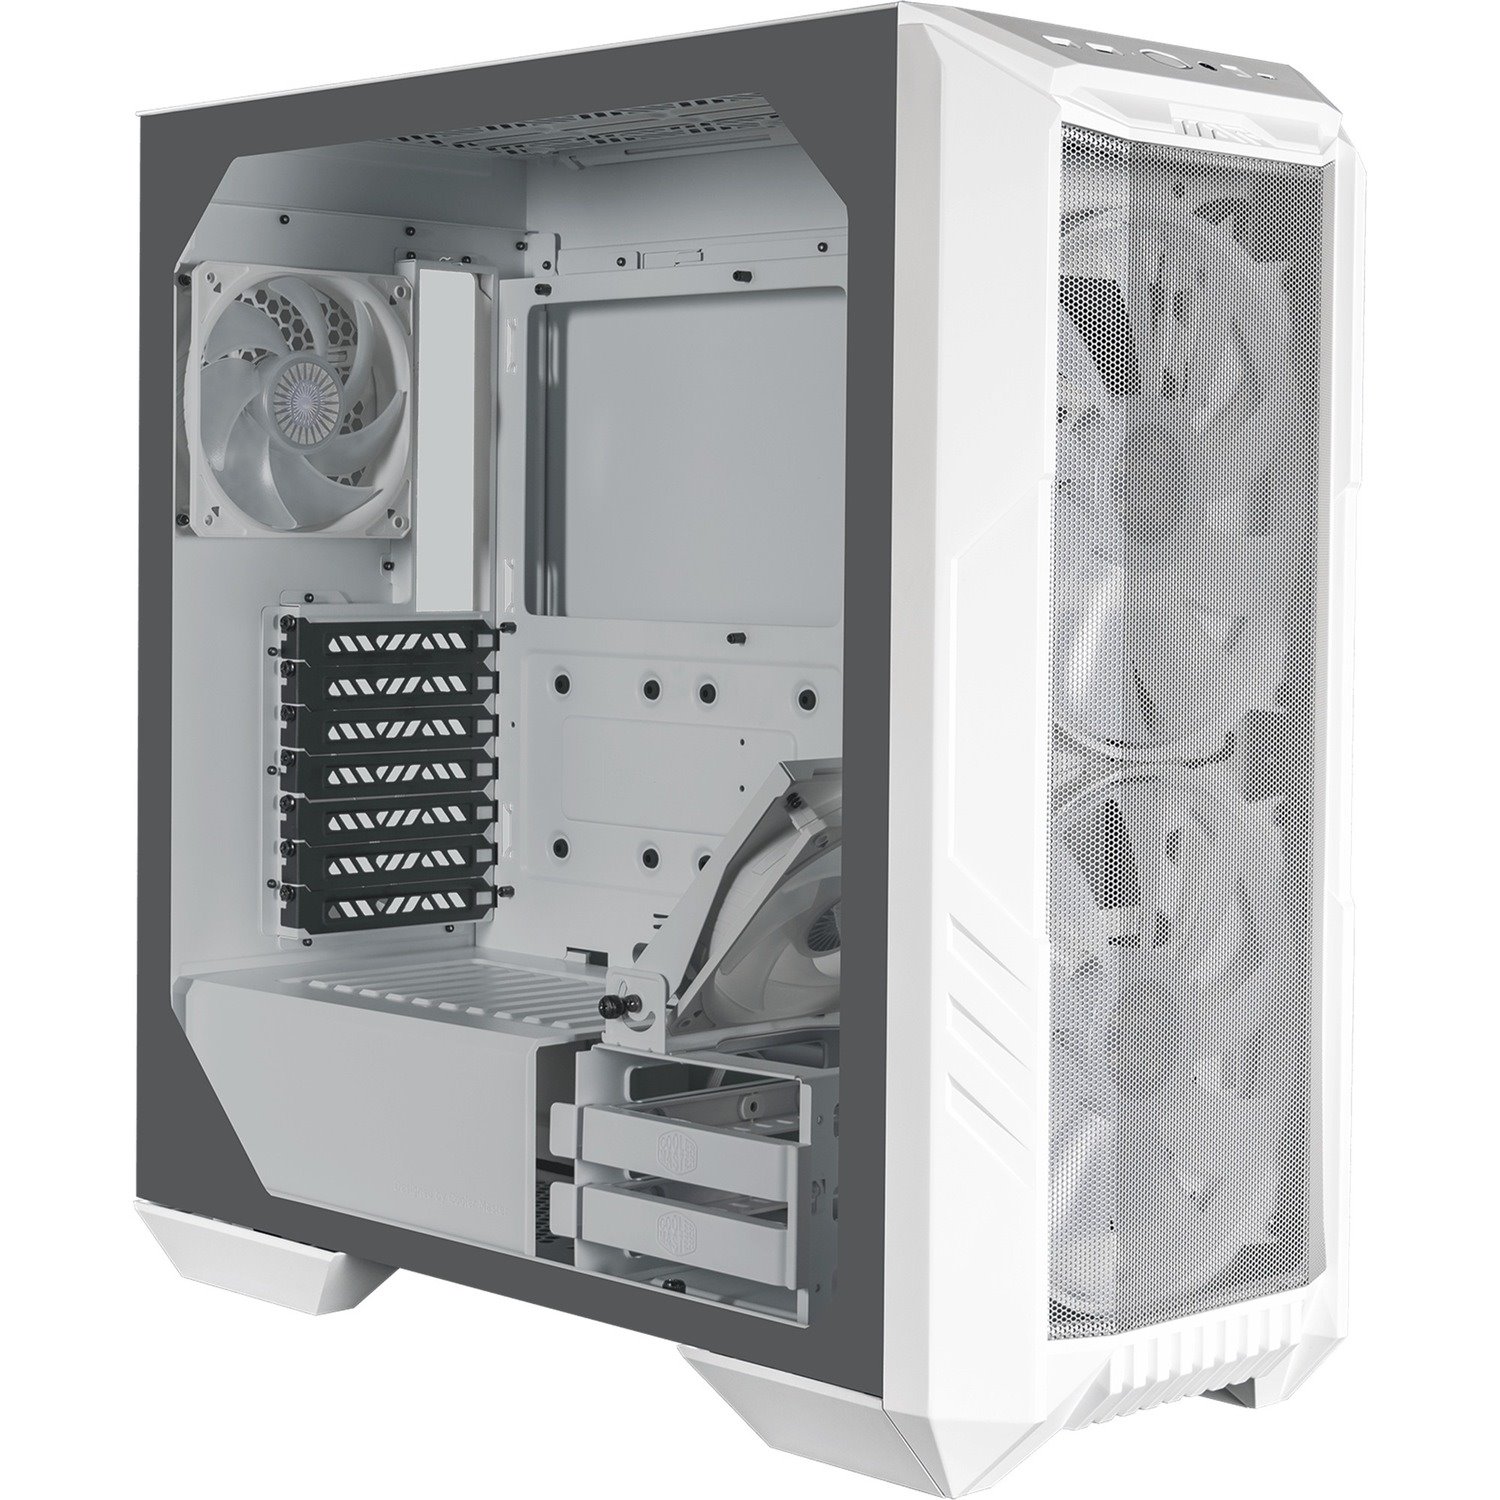 Cooler Master HAF Computer Case - ATX, Micro ATX, ITX, SSI CEB, EATX Motherboard Supported - Mid-tower - Steel, Mesh, Plastic, Tempered Glass - White